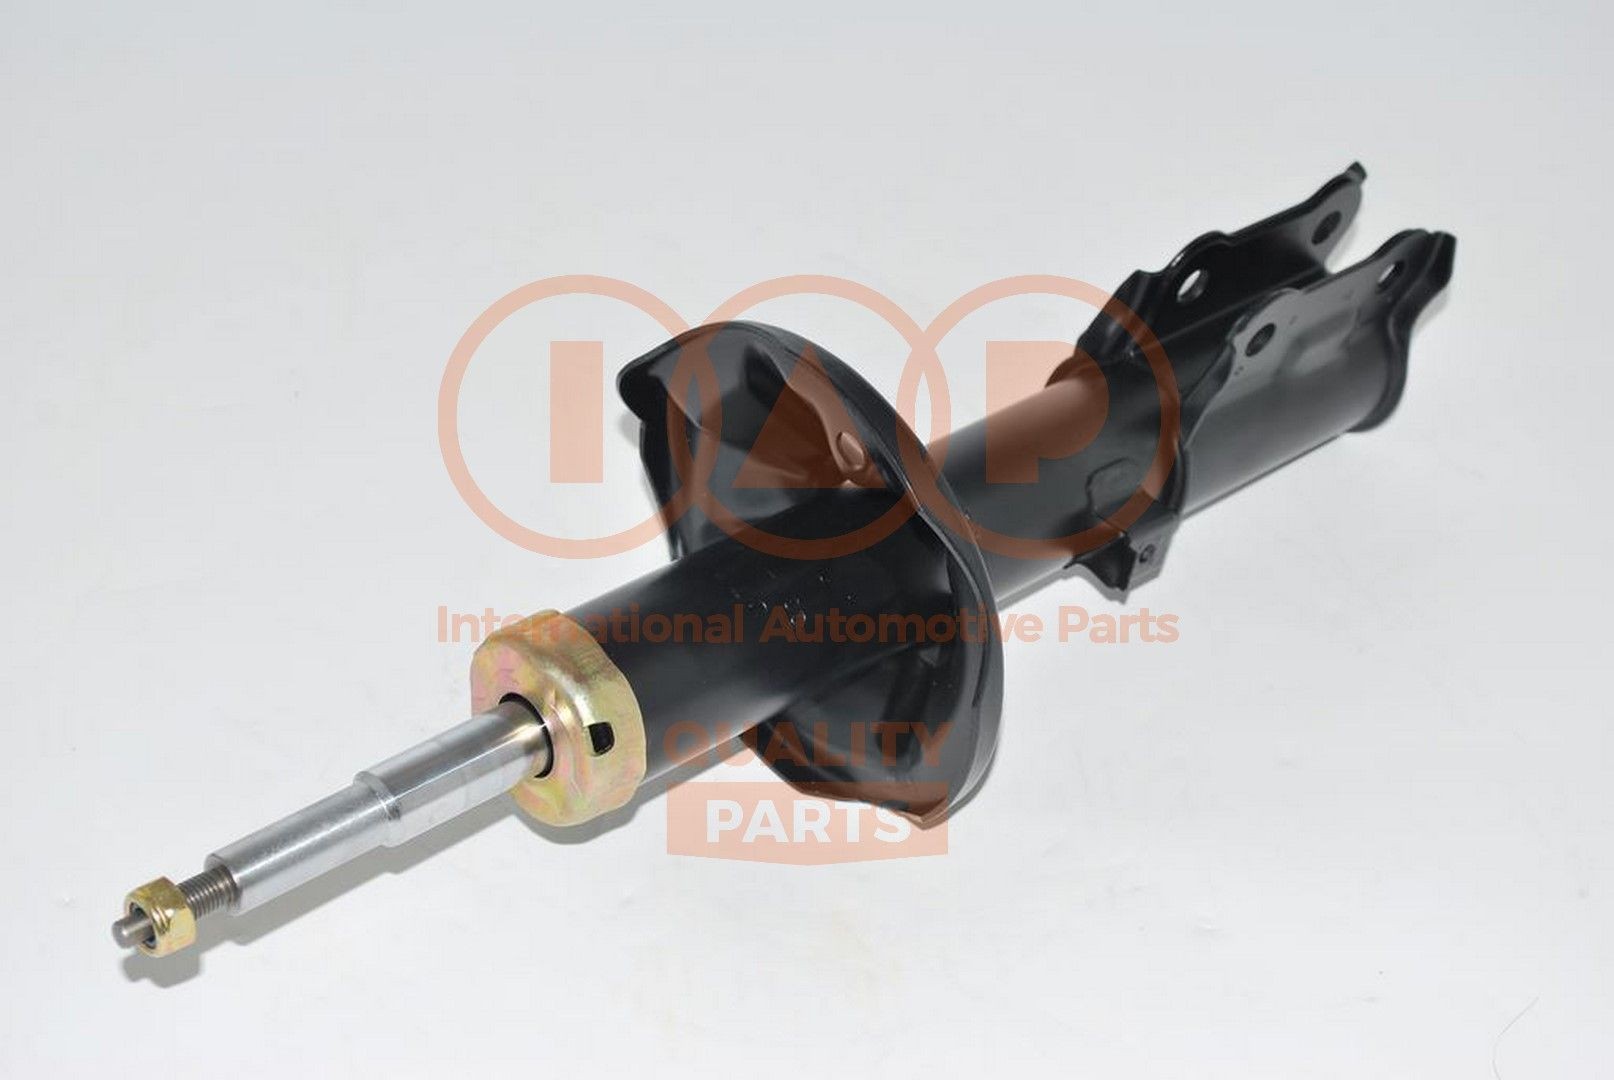 IAP QUALITY PARTS 504-07092 Shock absorber 54660-02220